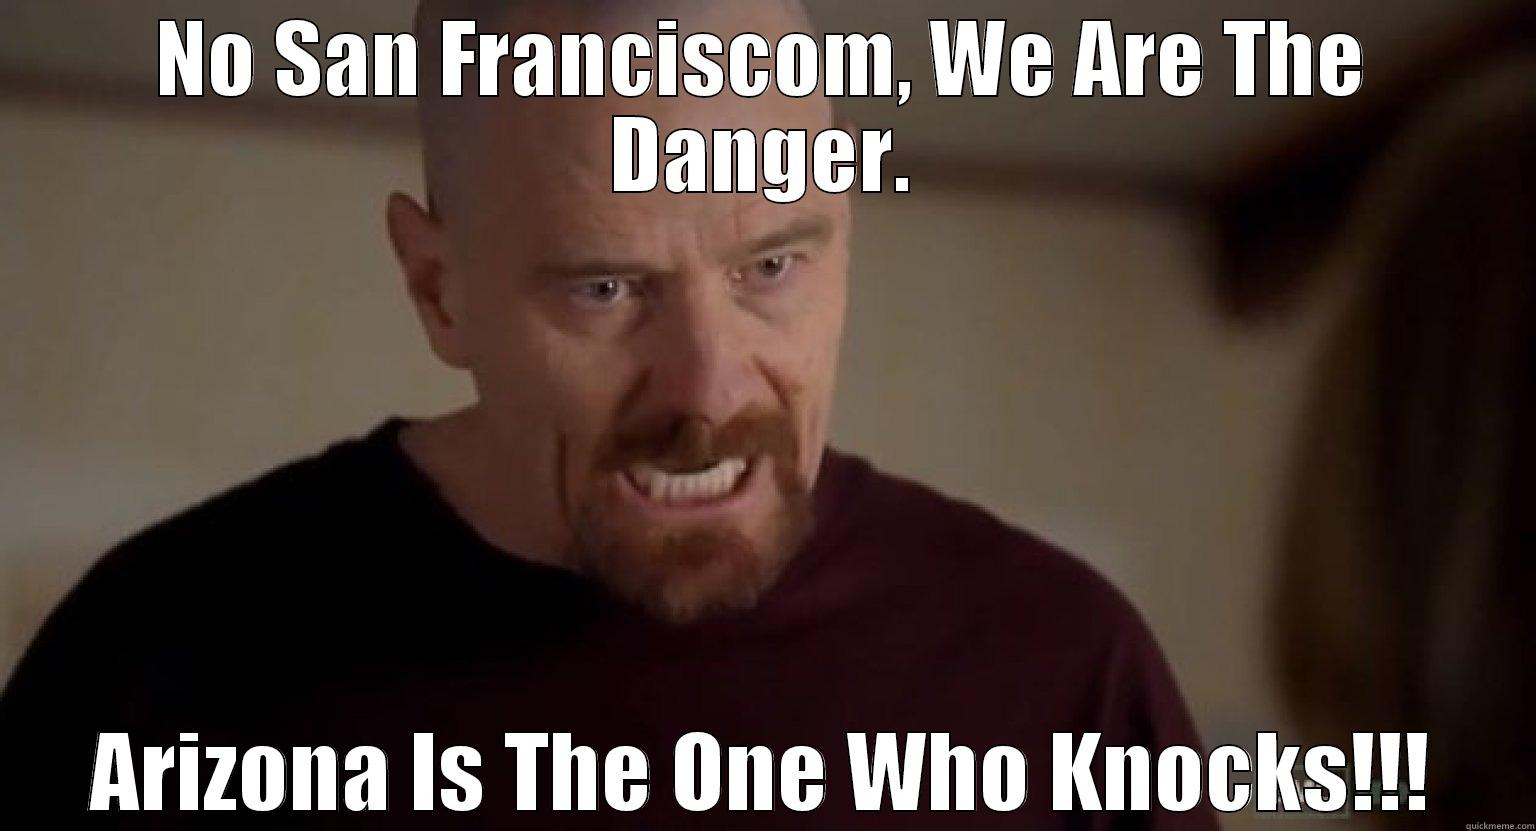 NO SAN FRANCISCOM, WE ARE THE DANGER. ARIZONA IS THE ONE WHO KNOCKS!!! Misc